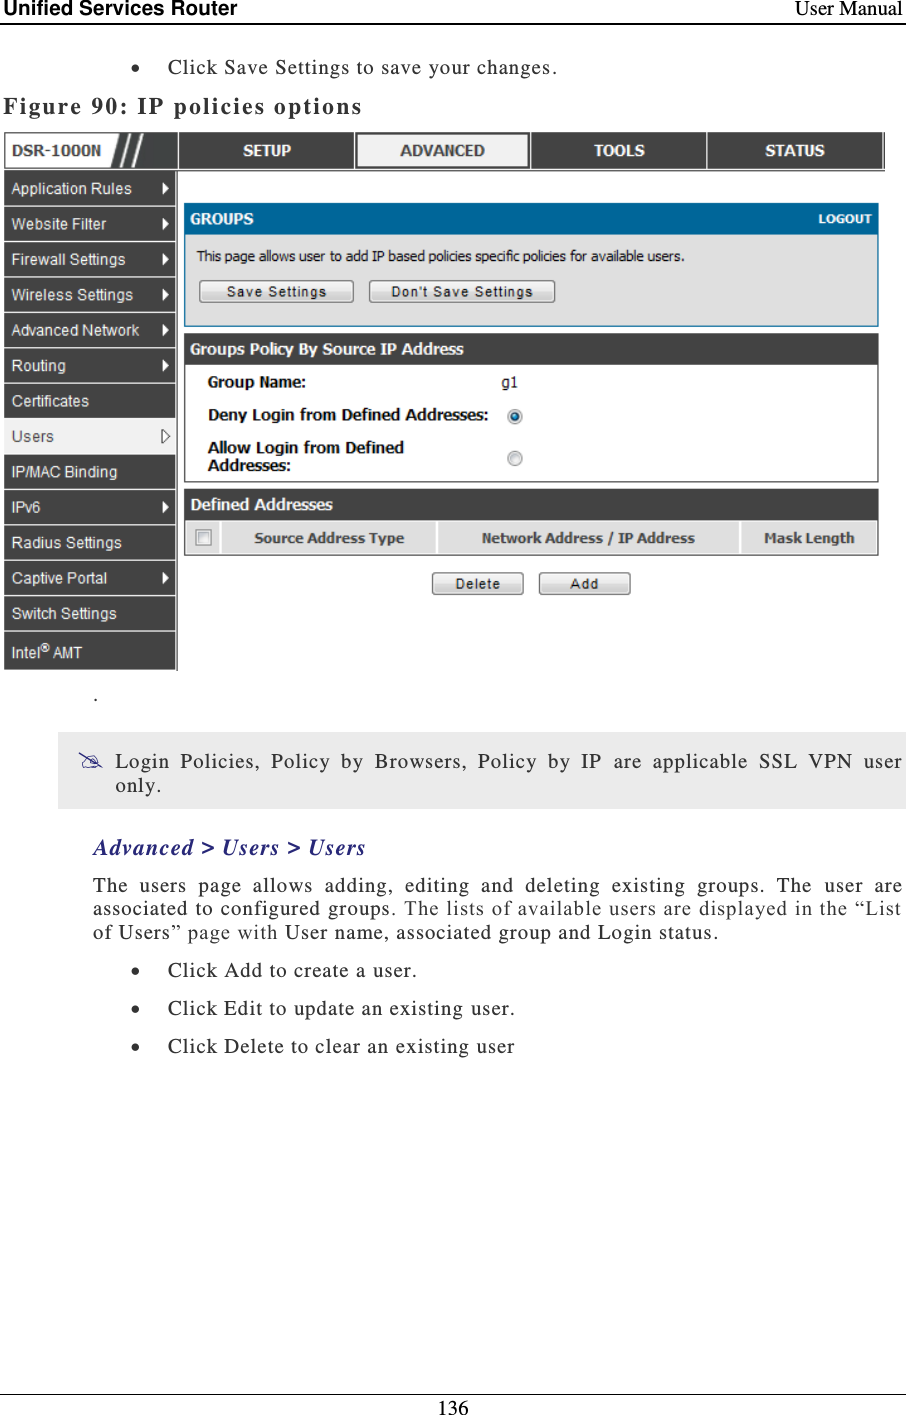 Unified Services Router    User Manual 136   Click Save Settings to save your changes. Figure 90: IP  policies options   .  Login  Policies,  Policy  by  Browsers,  Policy  by  IP   are  applicable  SSL  VPN  user only.  Advanced &gt; Users &gt; Users  The  users  page  allows  adding,  editing  and  deleting  existing  groups.  The  user  are associated to configured groups. The lists of available users are displayed in the “List of Users” page with User name, associated group and Login status.  Click Add to create a user.  Click Edit to update an existing user.  Click Delete to clear an existing user 